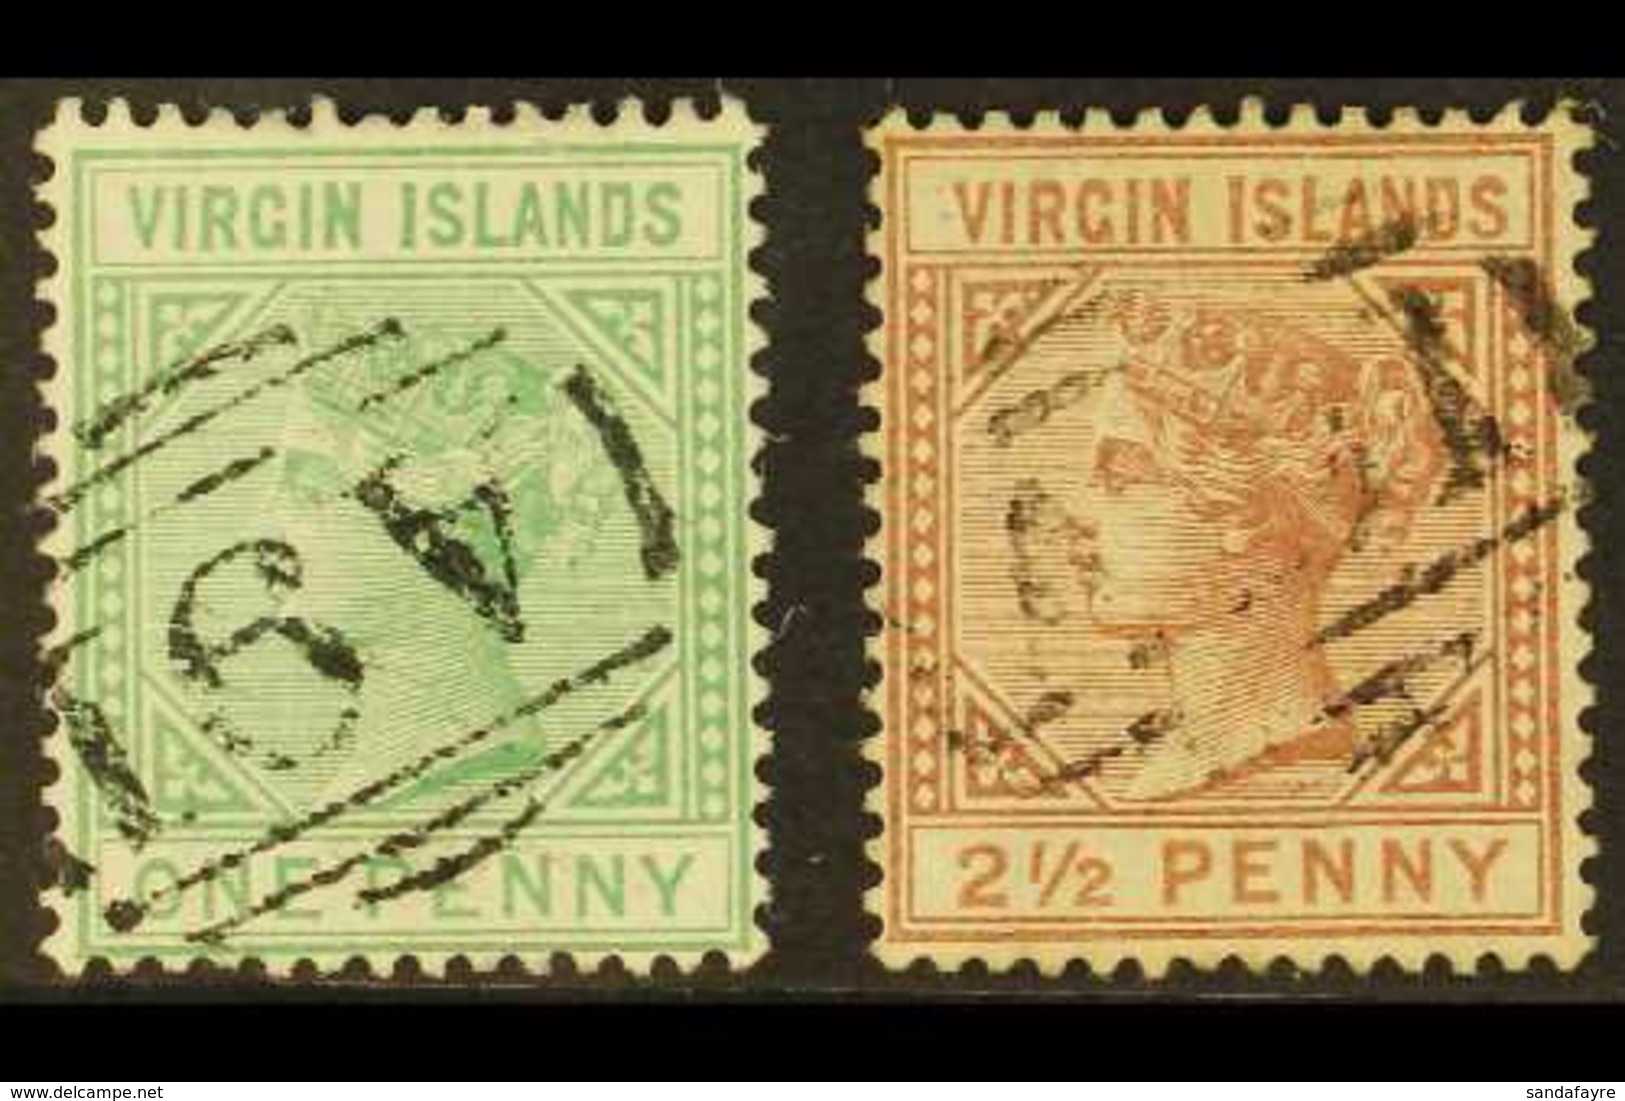 1879-80 1d Emerald-green And 2½d Red-brown, SG 24/25, Each With Neat A91 Cancel. (2 Stamps) For More Images, Please Visi - British Virgin Islands